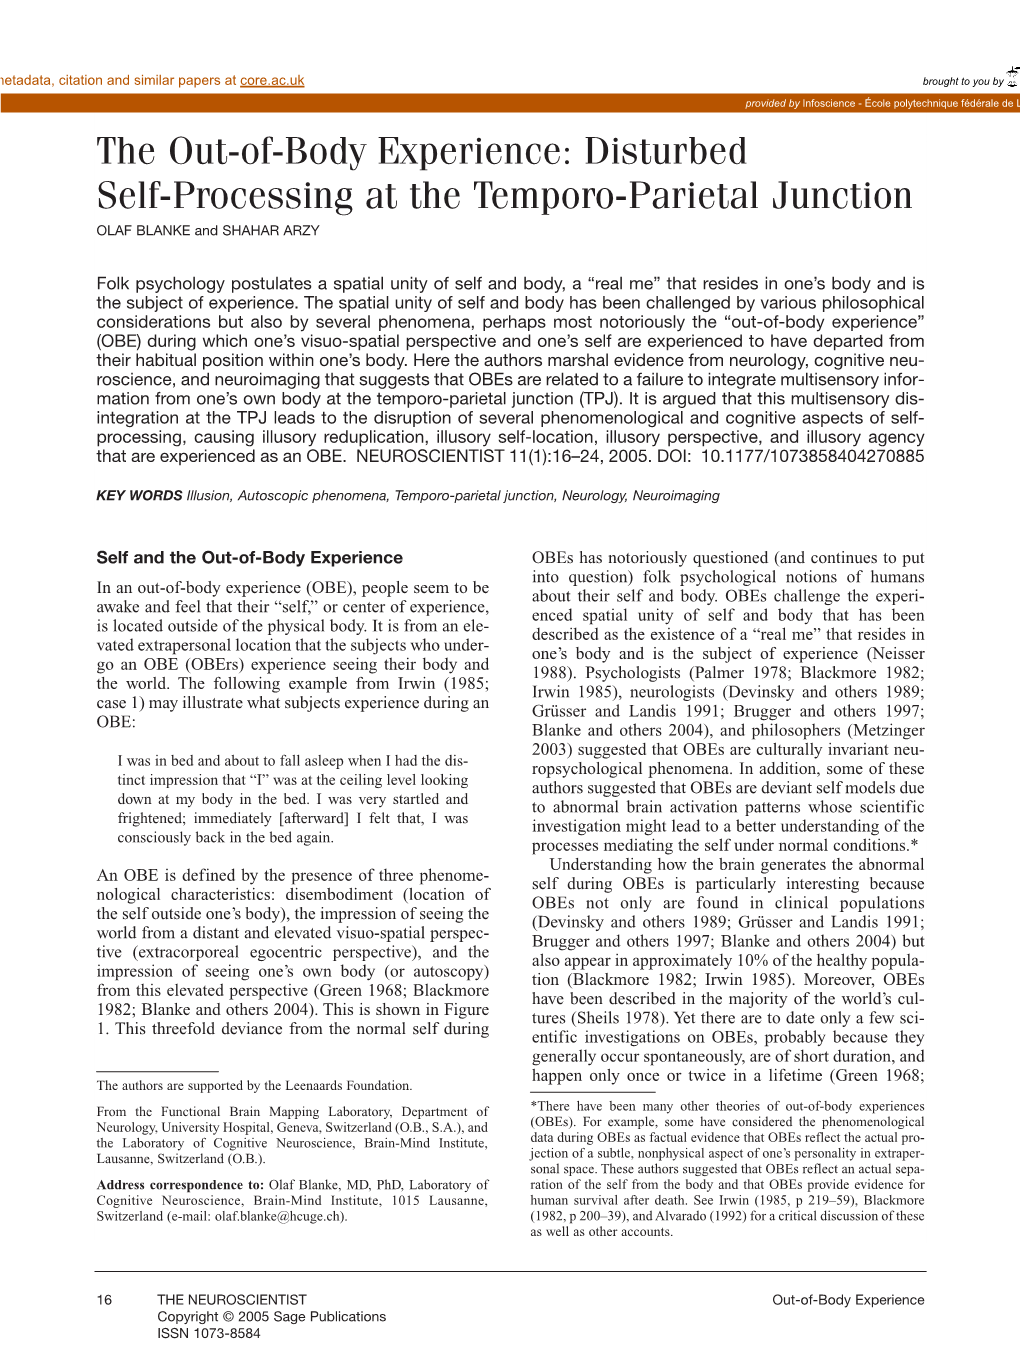 The Out-Of-Body Experience: Disturbed Self-Processing at the Temporo-Parietal Junction OLAF BLANKE and SHAHAR ARZY